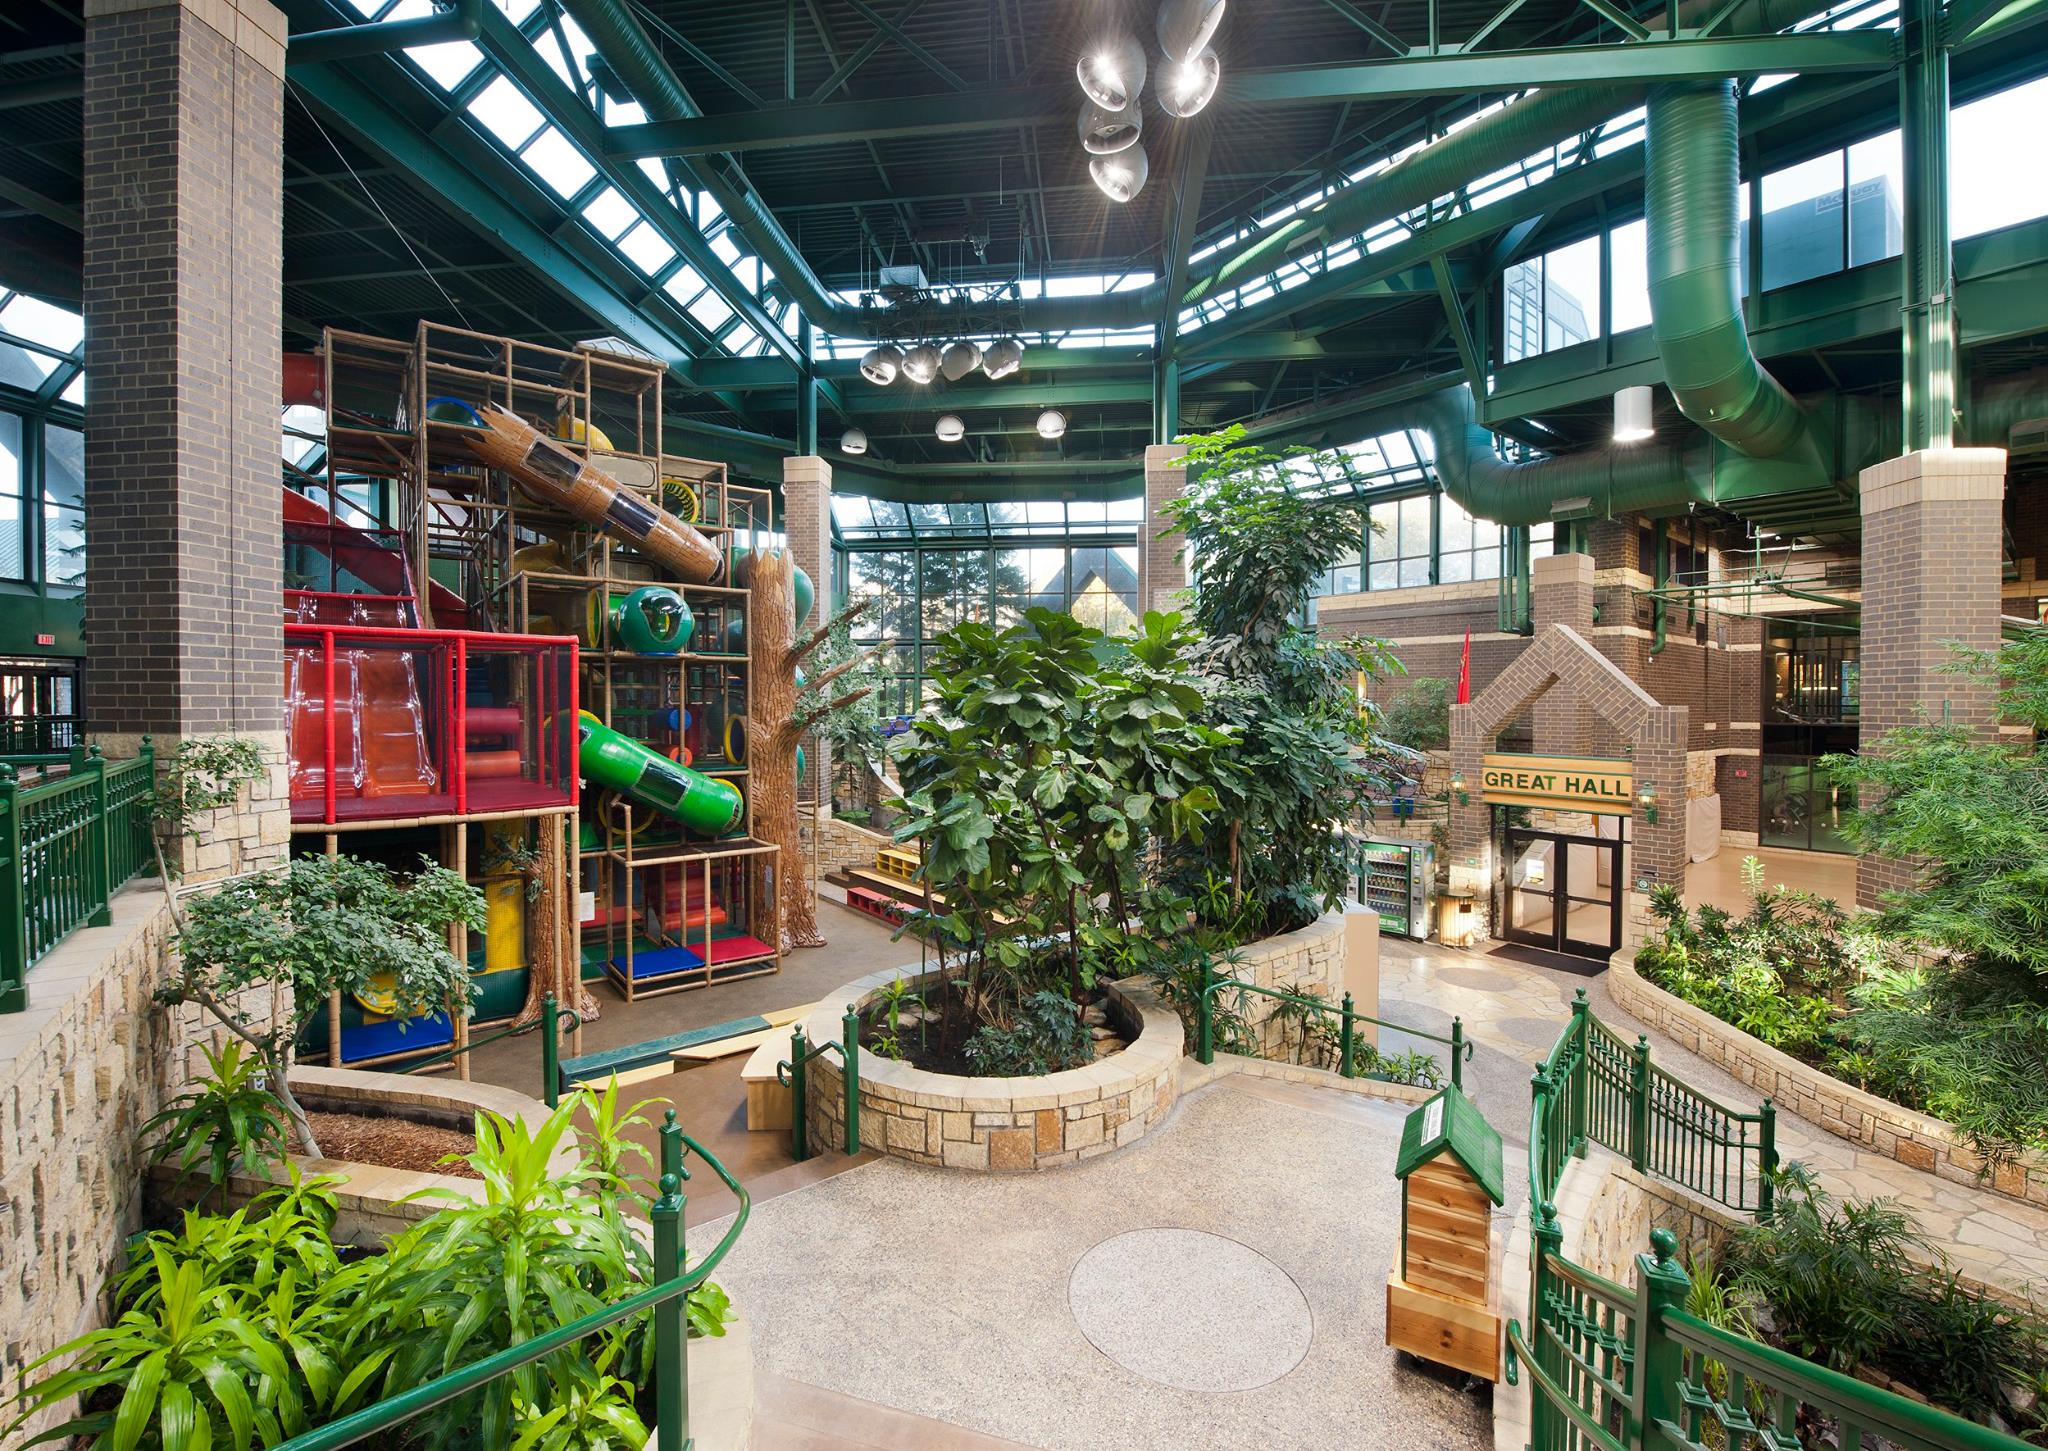 The Most Epic Indoor Playground In Minnesota Will Bring Out The Kid In ...